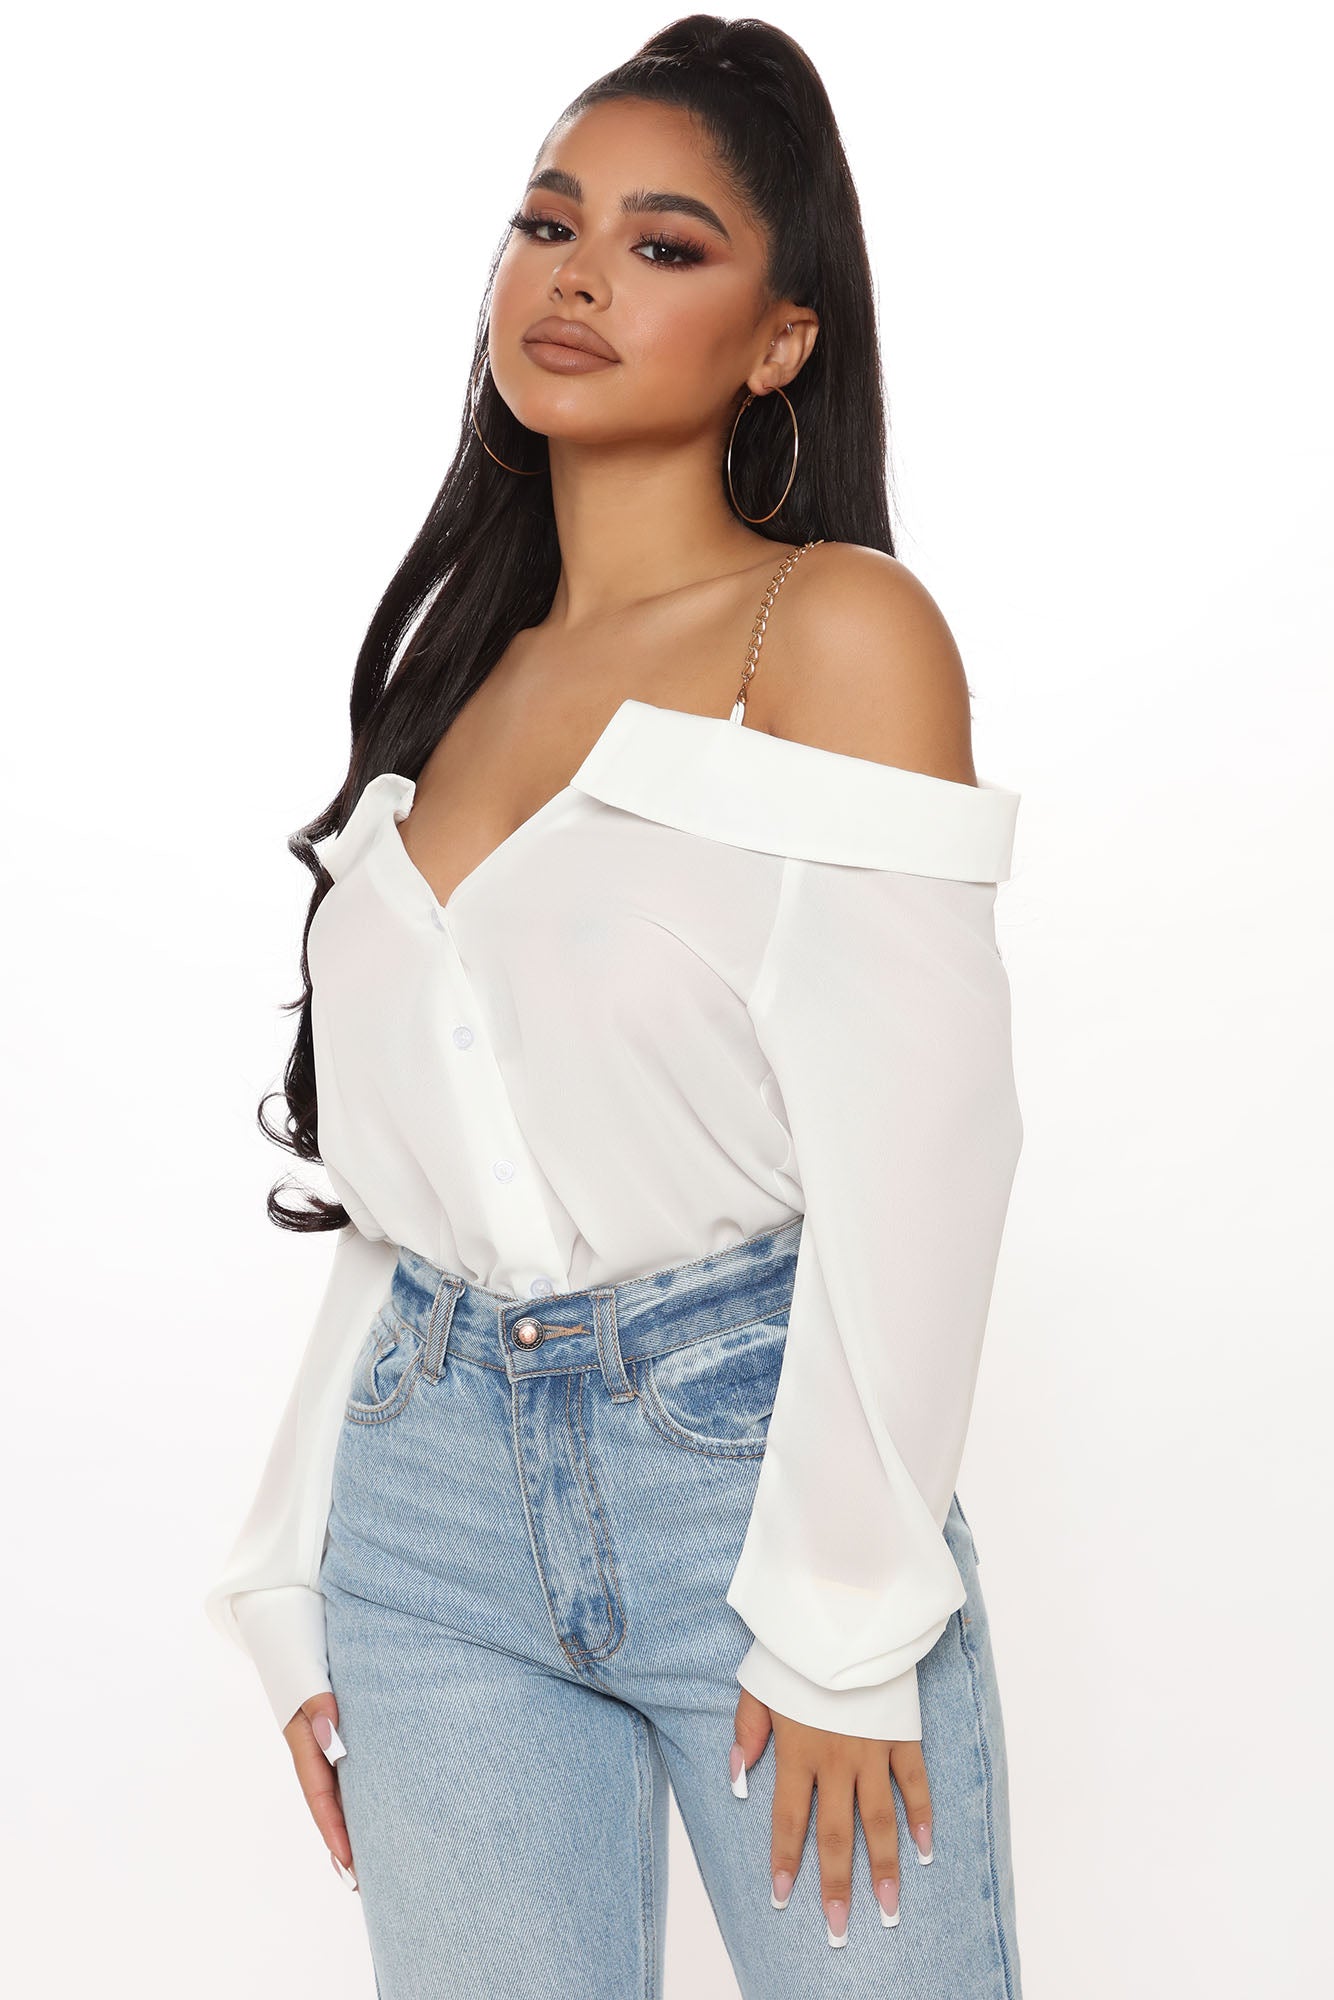 Off The Chain Chiffon Top - Ivory